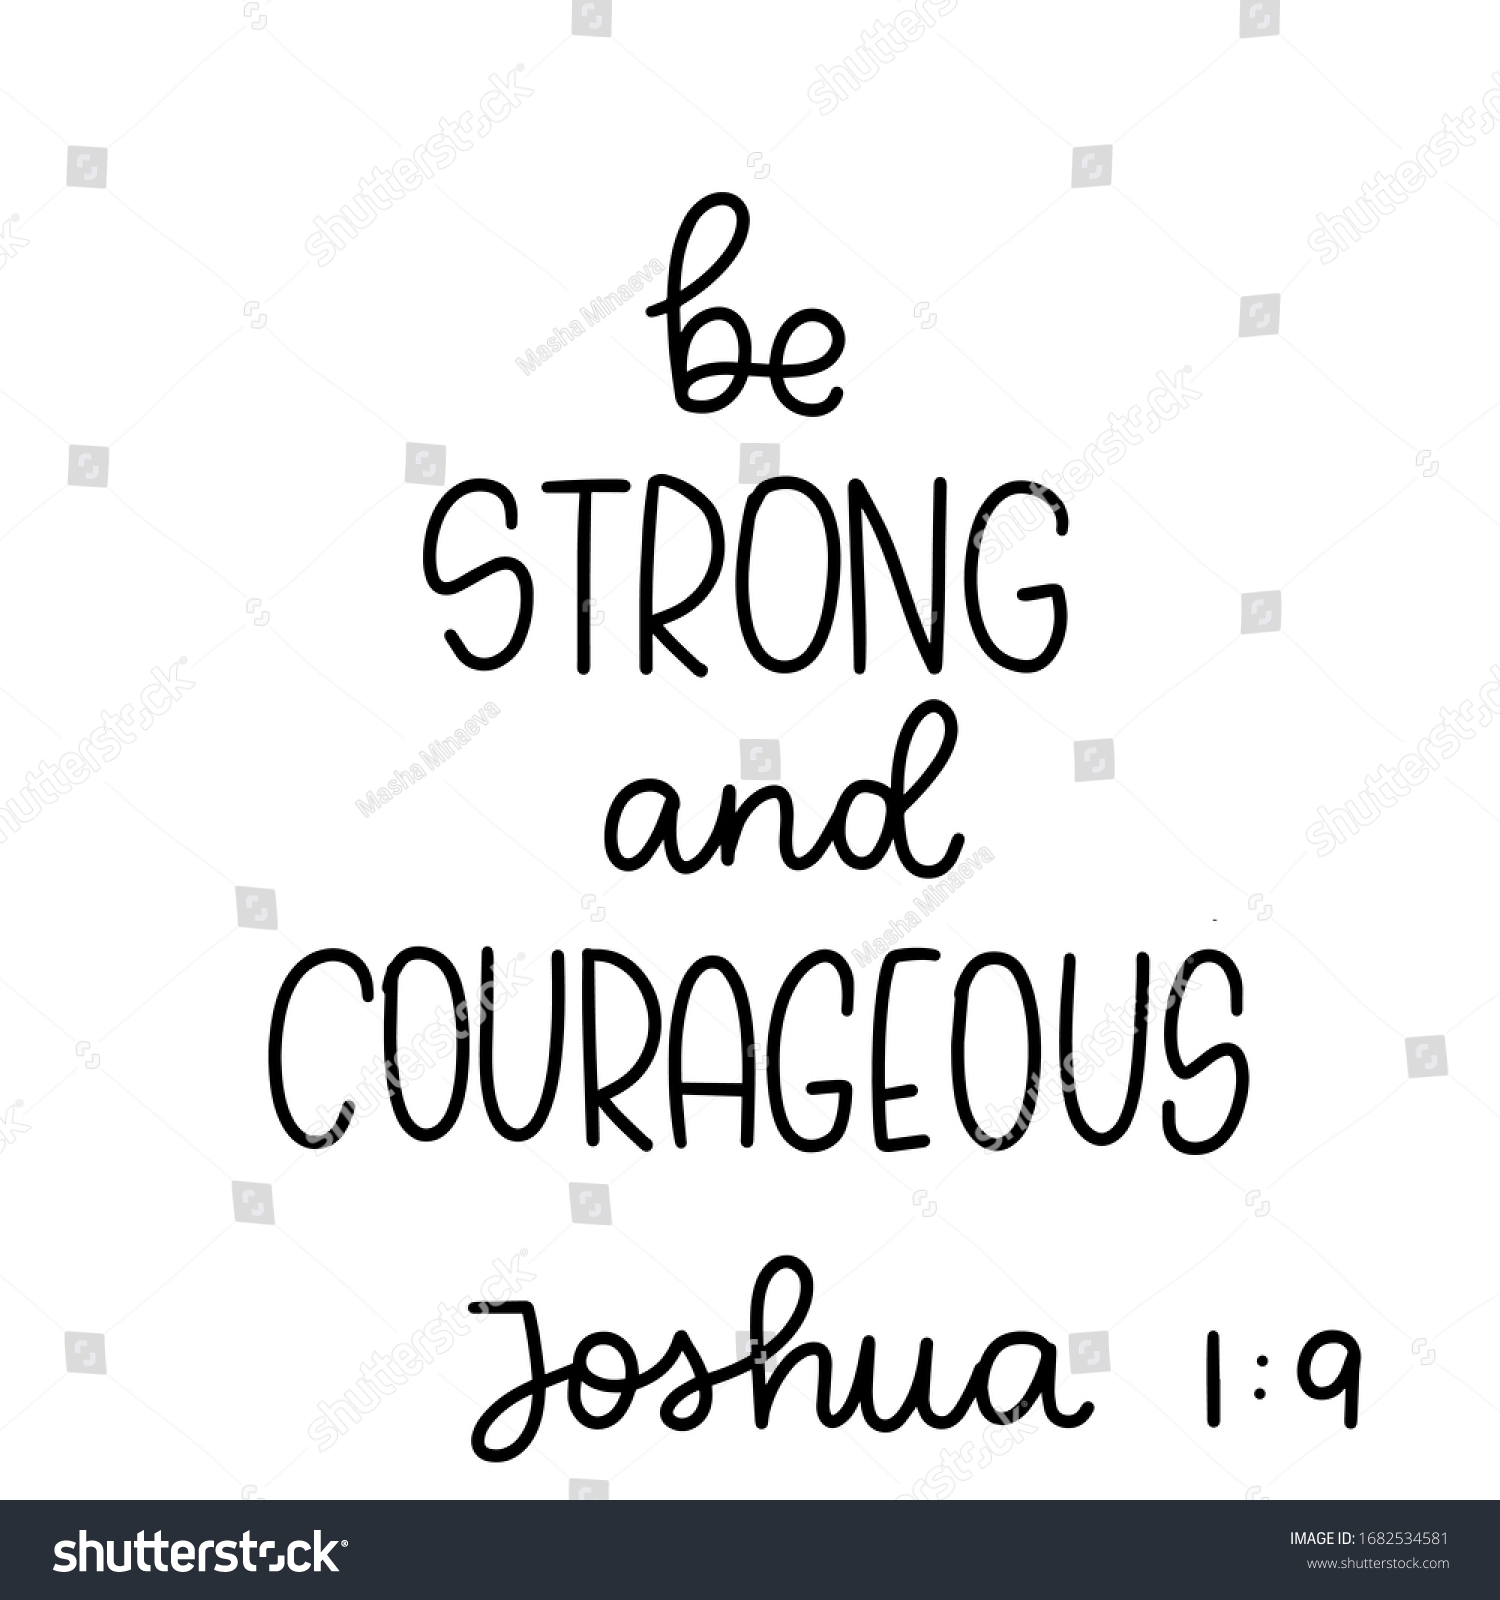 SVG of Bible Christian quote vector design with be strong and courageous Joshua 1:9 handwritten lettering phrase. Short saying about human strengths. svg